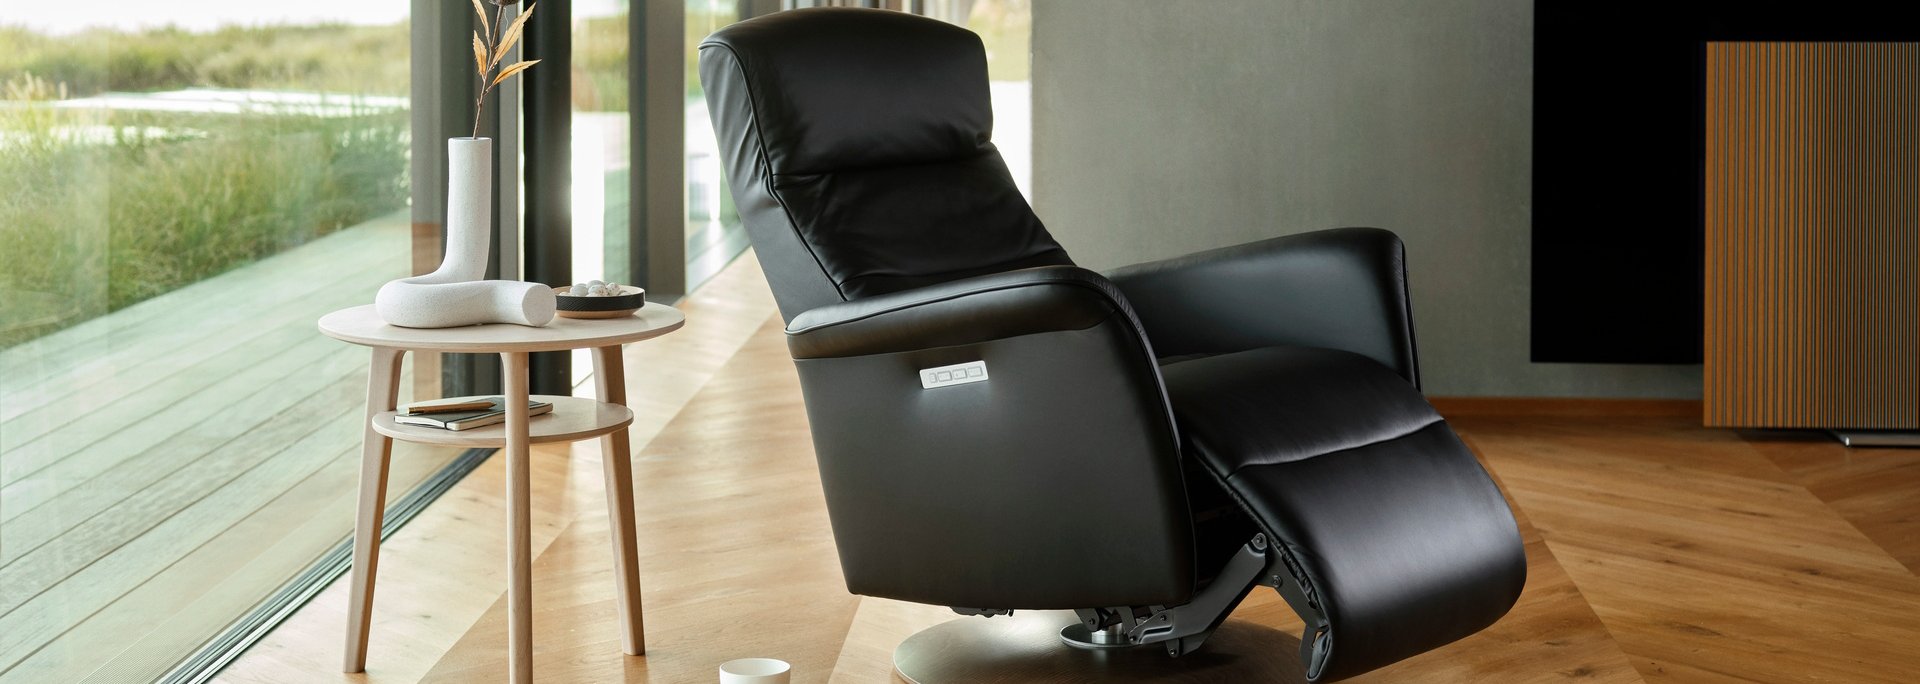 Stressless Power Base Recliners – SL Recliners